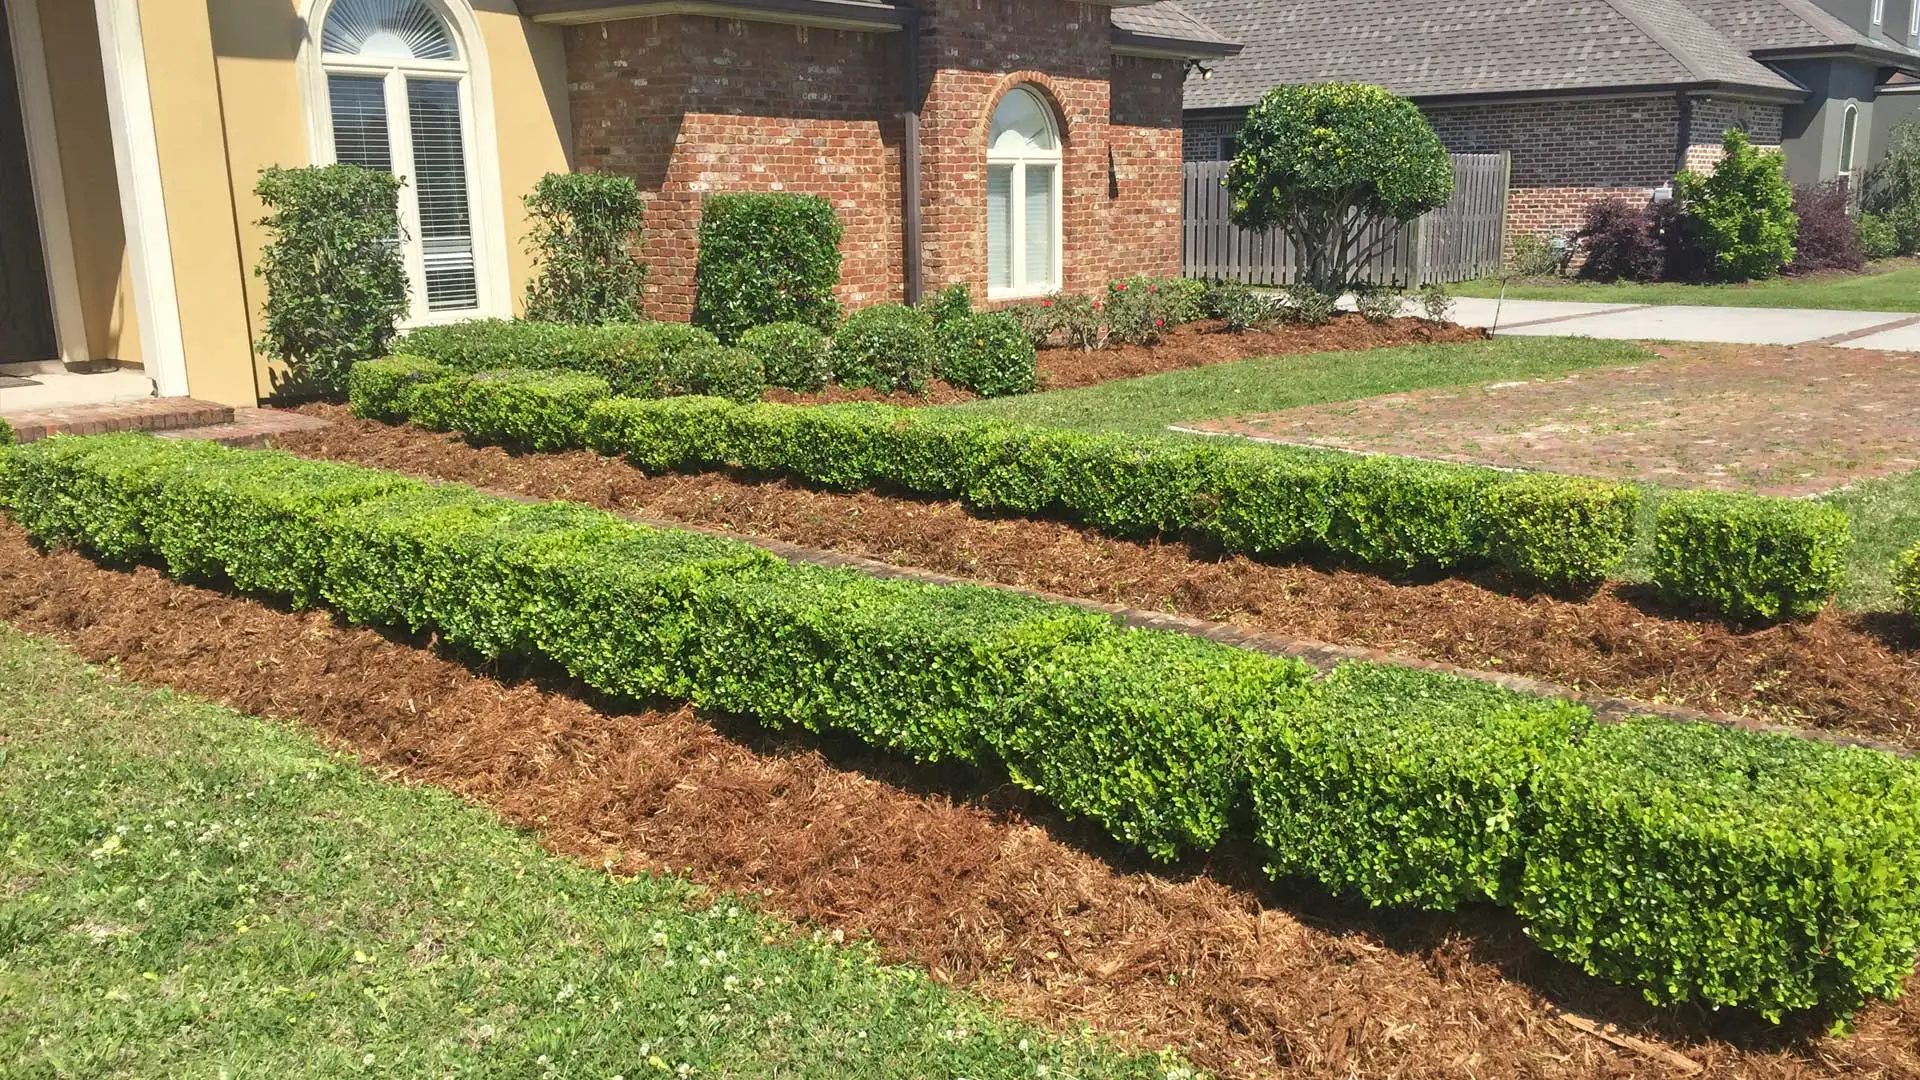 Recently trimmed bushes and shrubs in front of a residential property in Houma, LA.